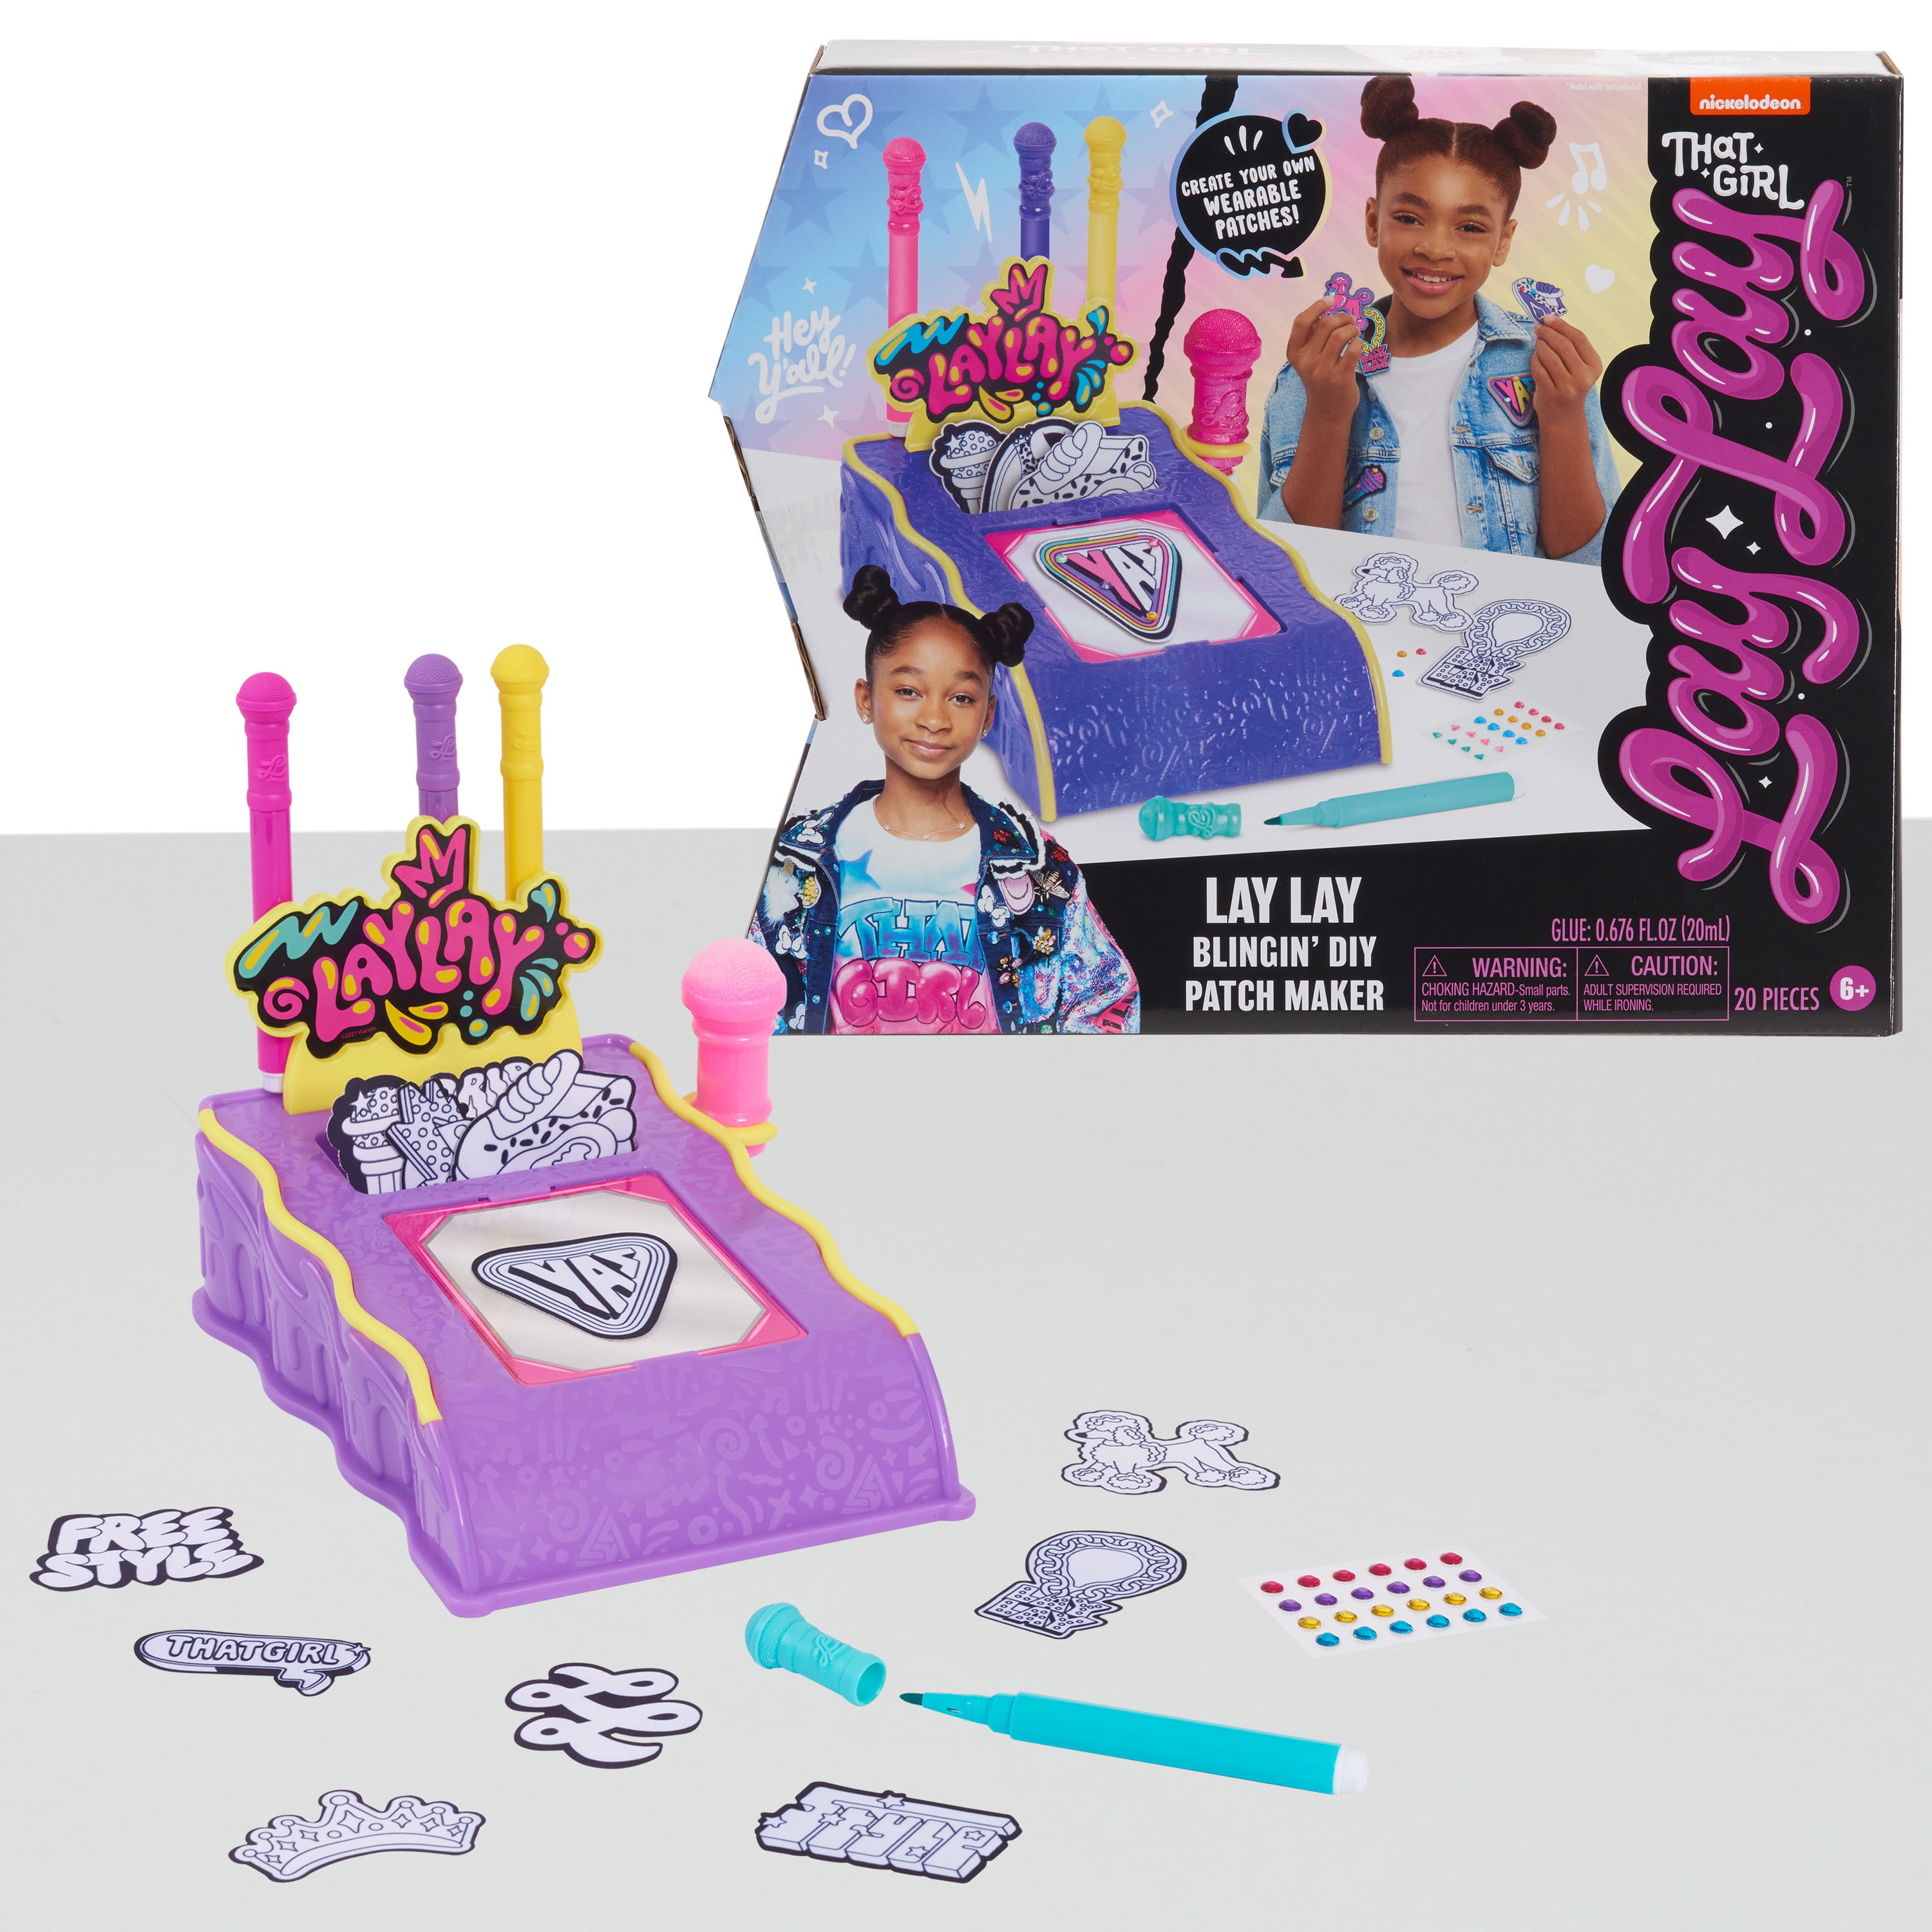 Nickelodeon That Girl Lay Lay’s Blingin’ DIY Patch Maker,  Kids Toys for Ages 6 Up, Gifts and Presents